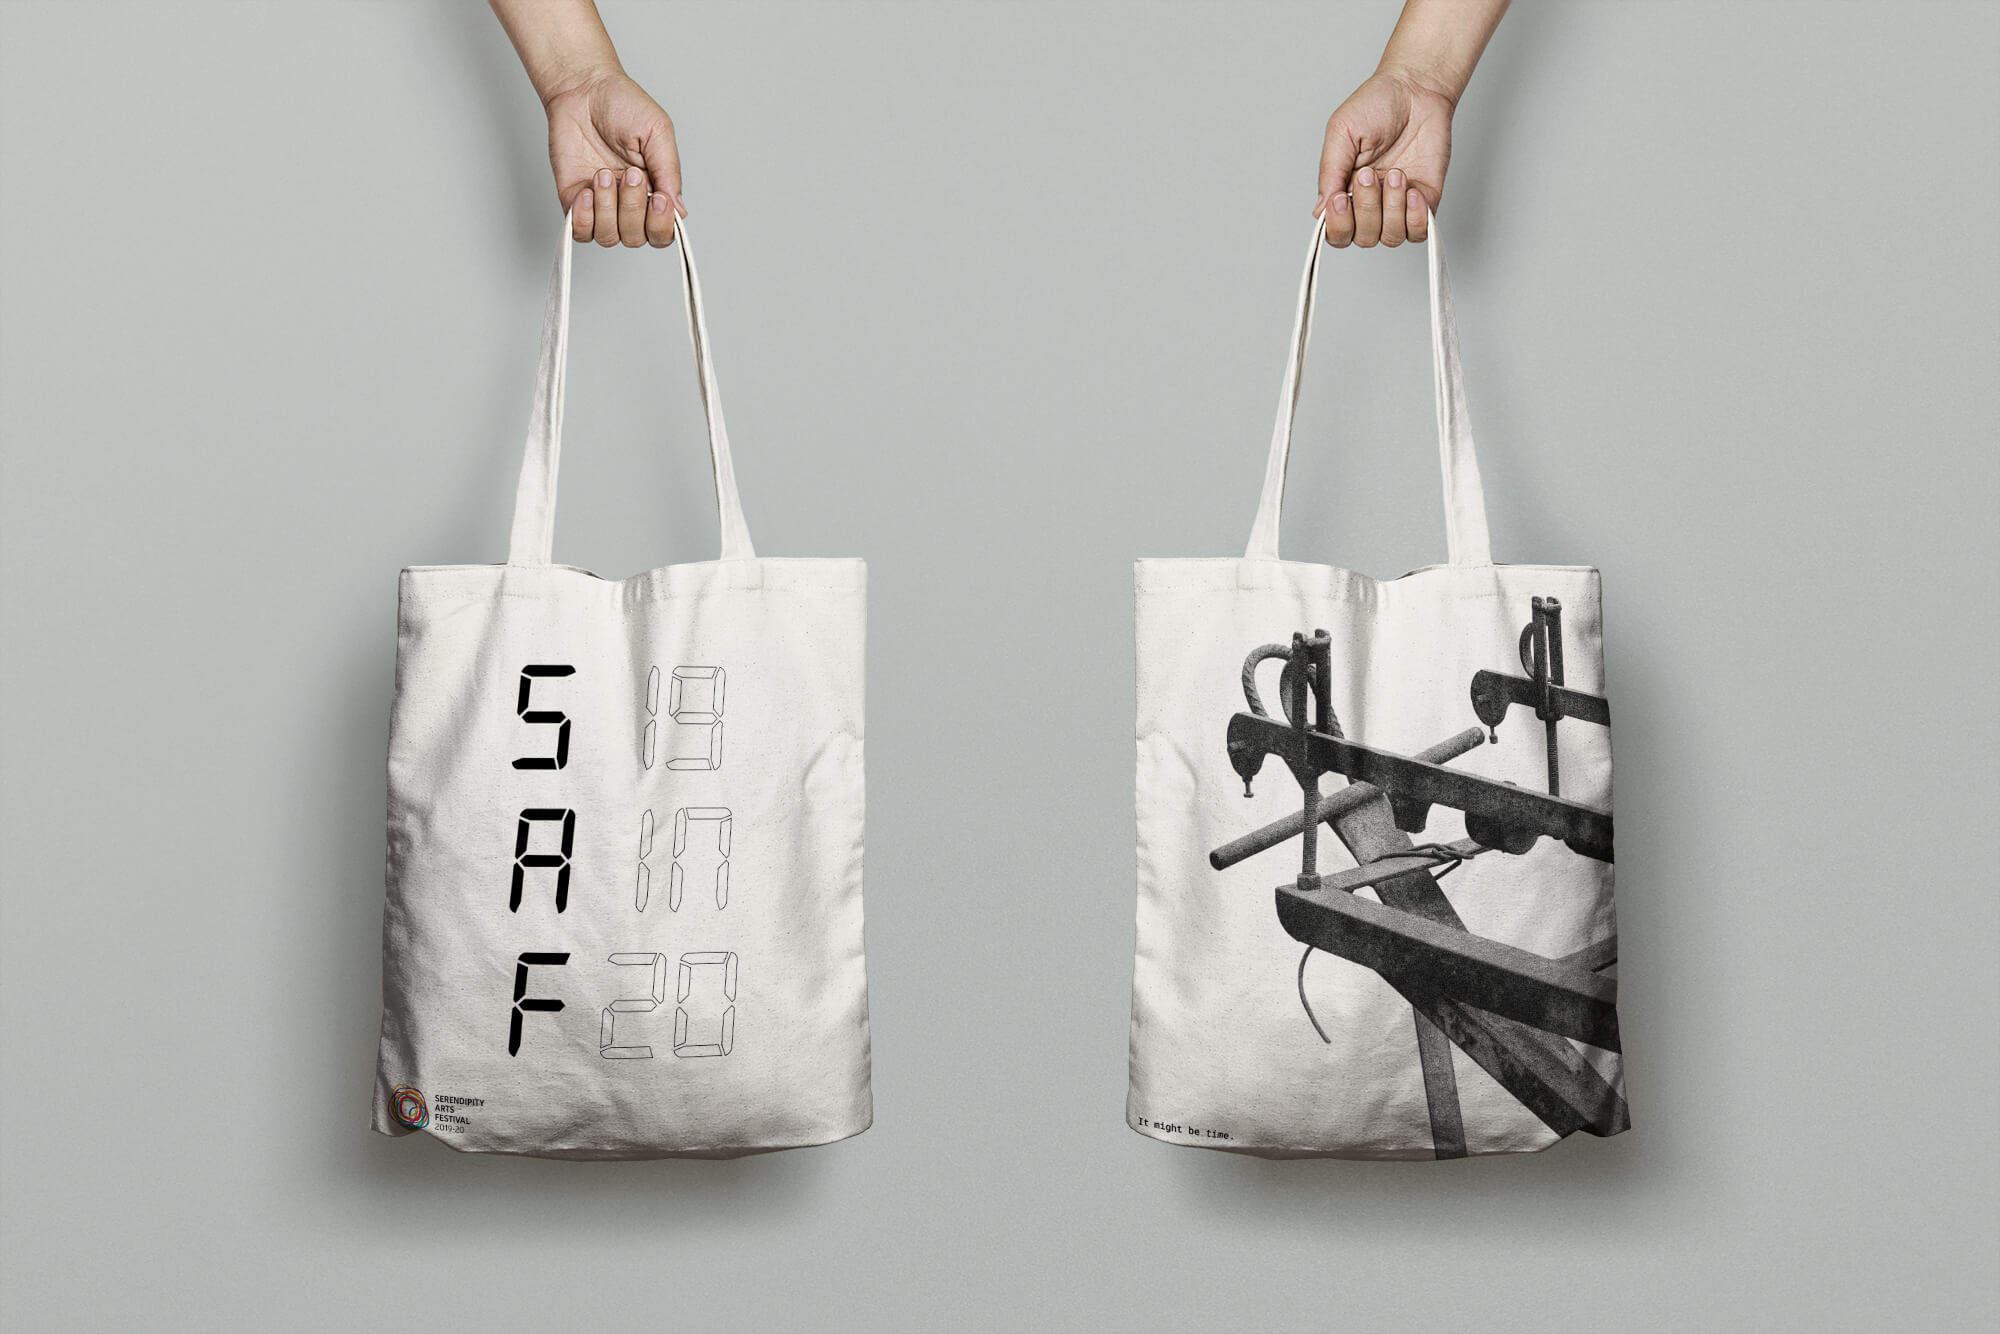 Photo of tote bags showing SAF 19in20 branding